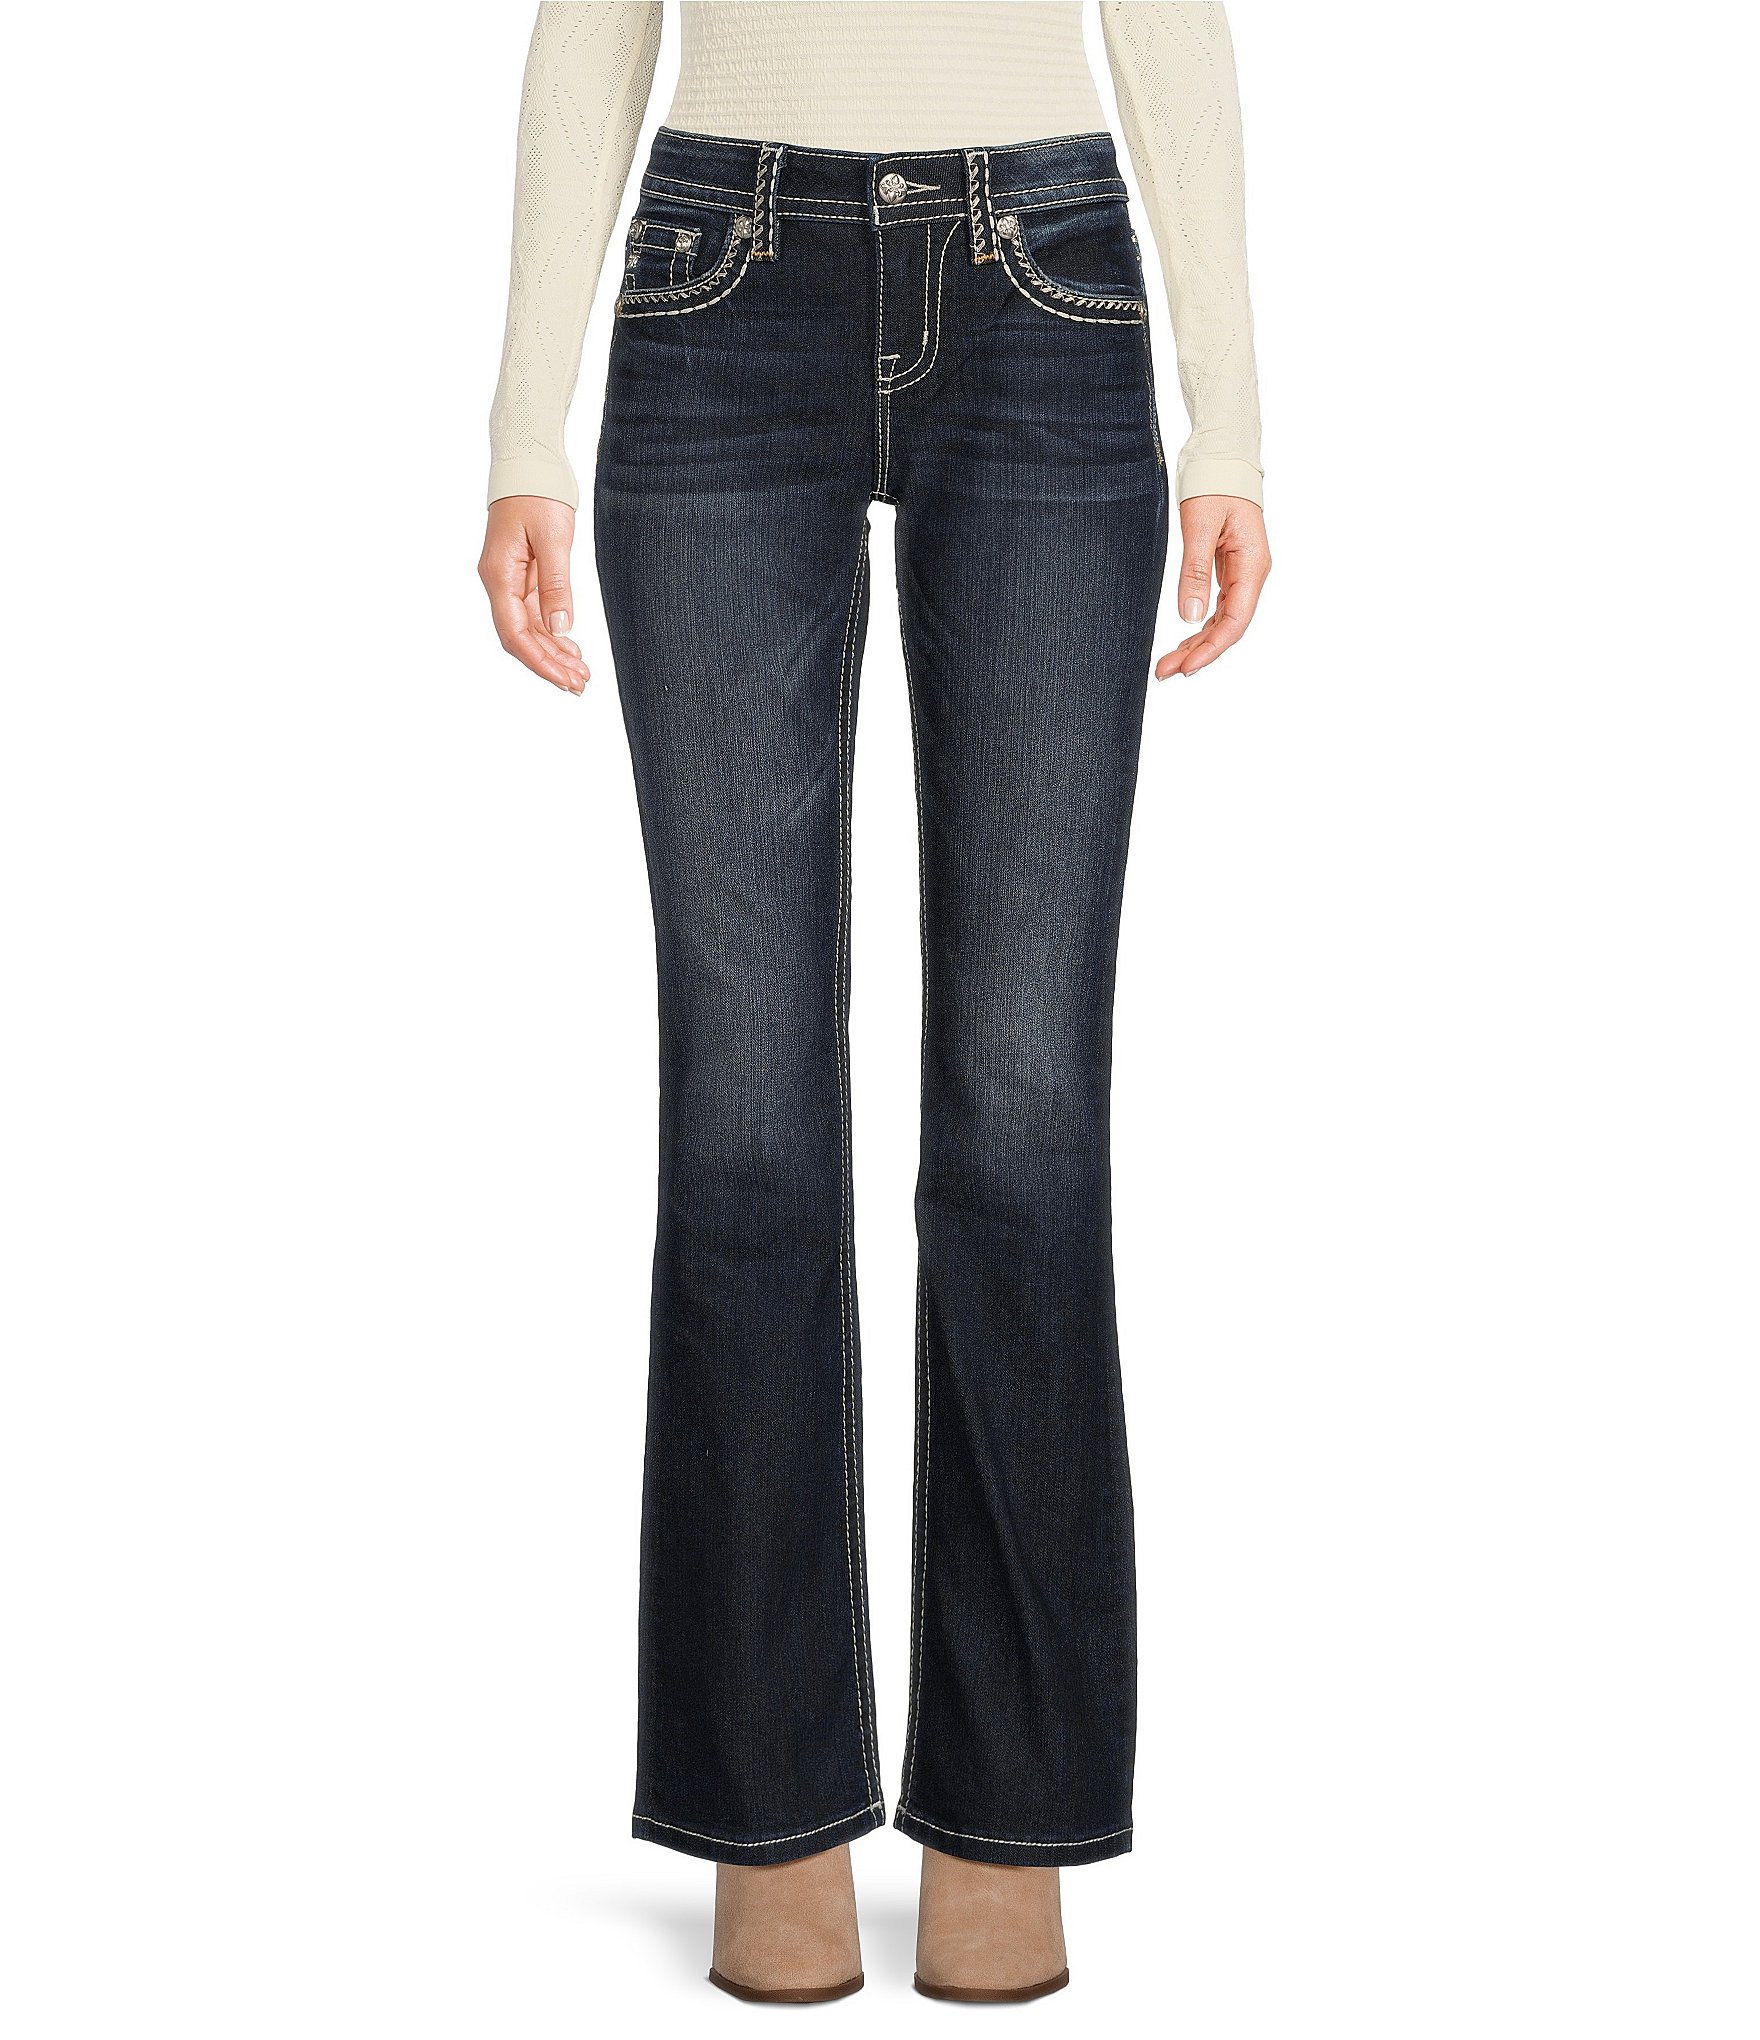 Womens Bootleg Jeans  Pick 'n Pay Clothing